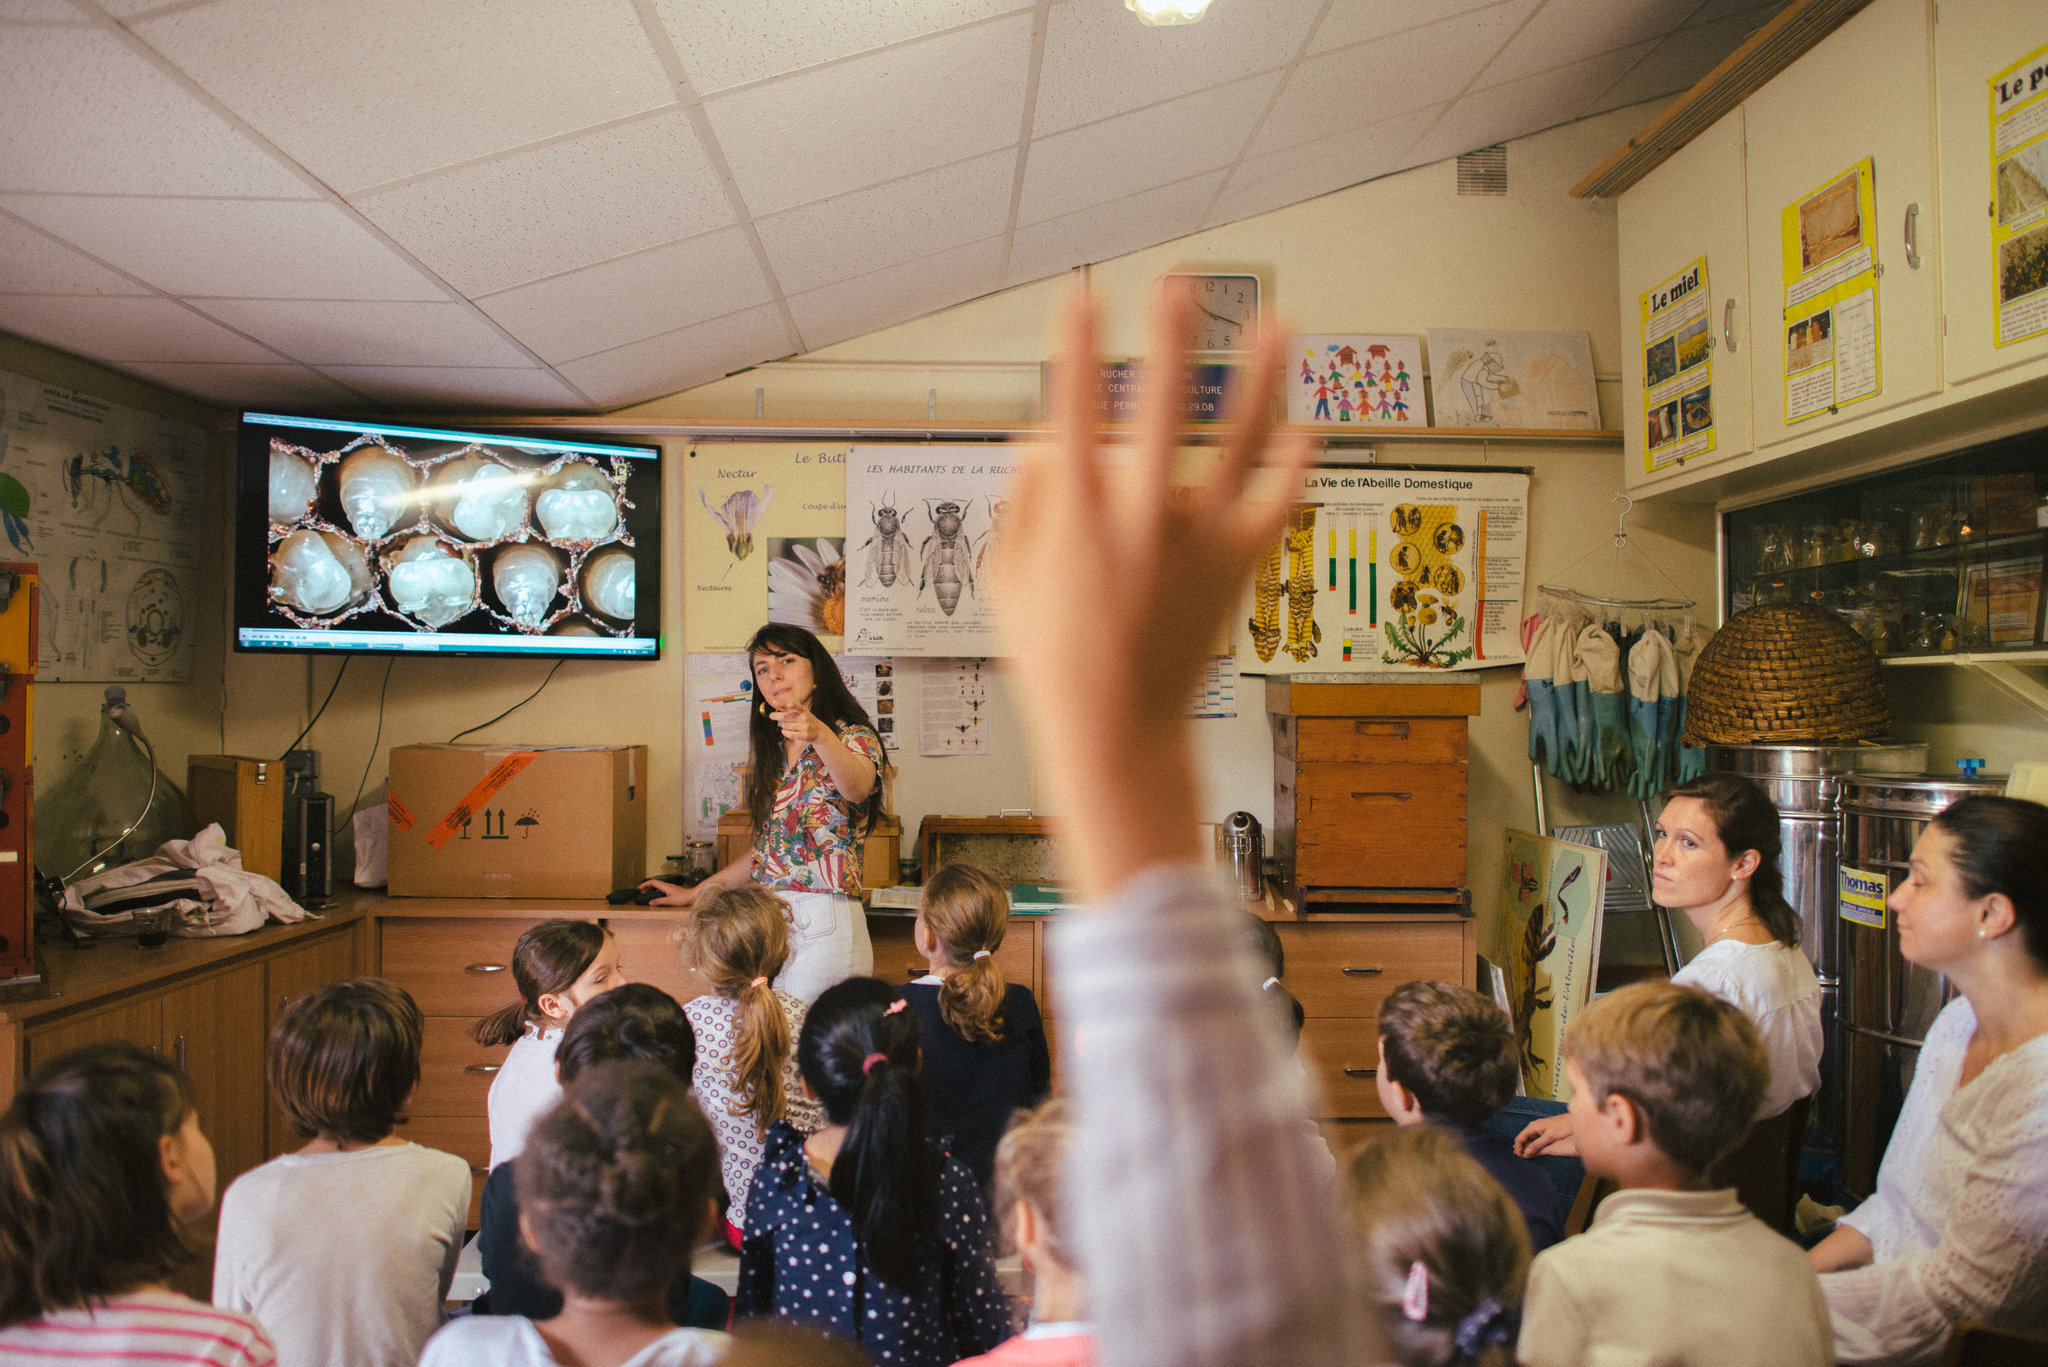  Jamie Lozoff, a beekeeper, during a lesson teaching apiculture skills to children in Paris.   